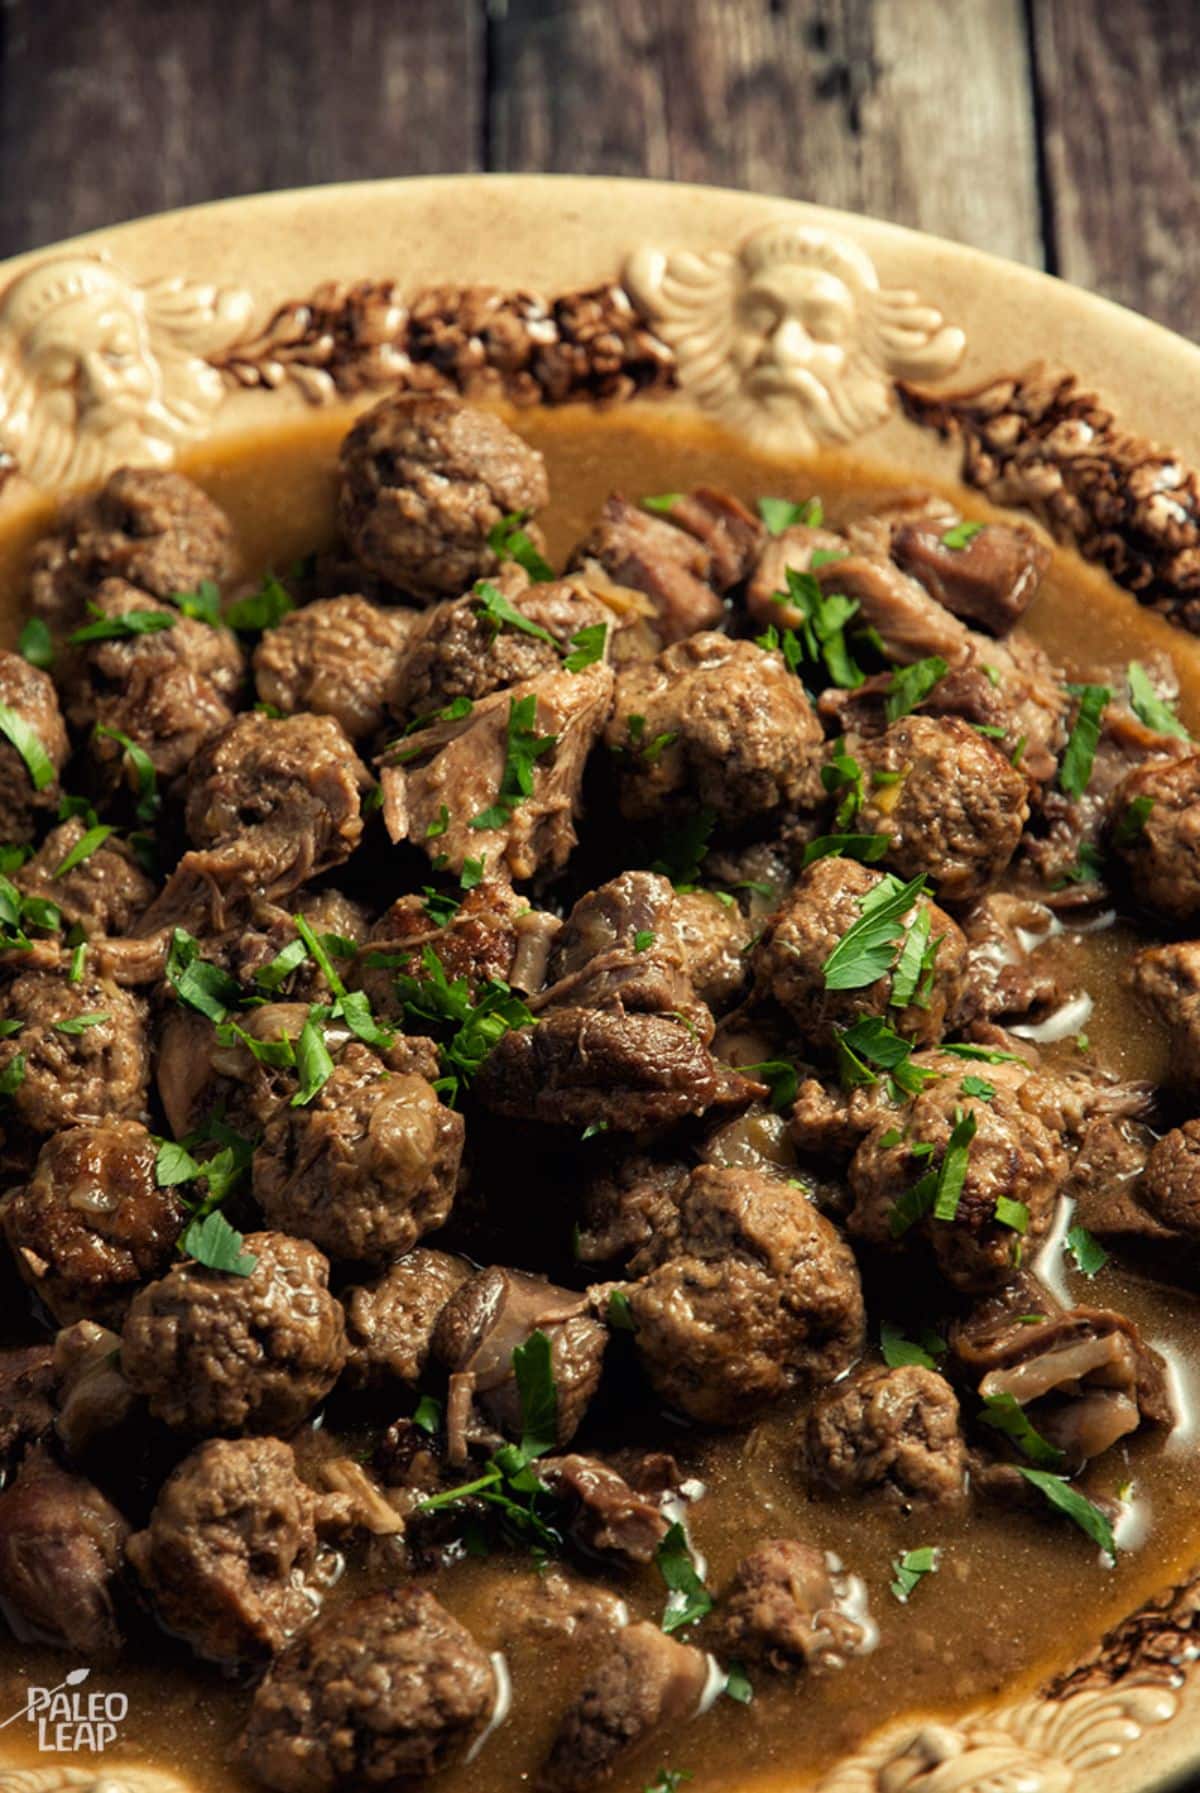 Bison and Meatball Stew